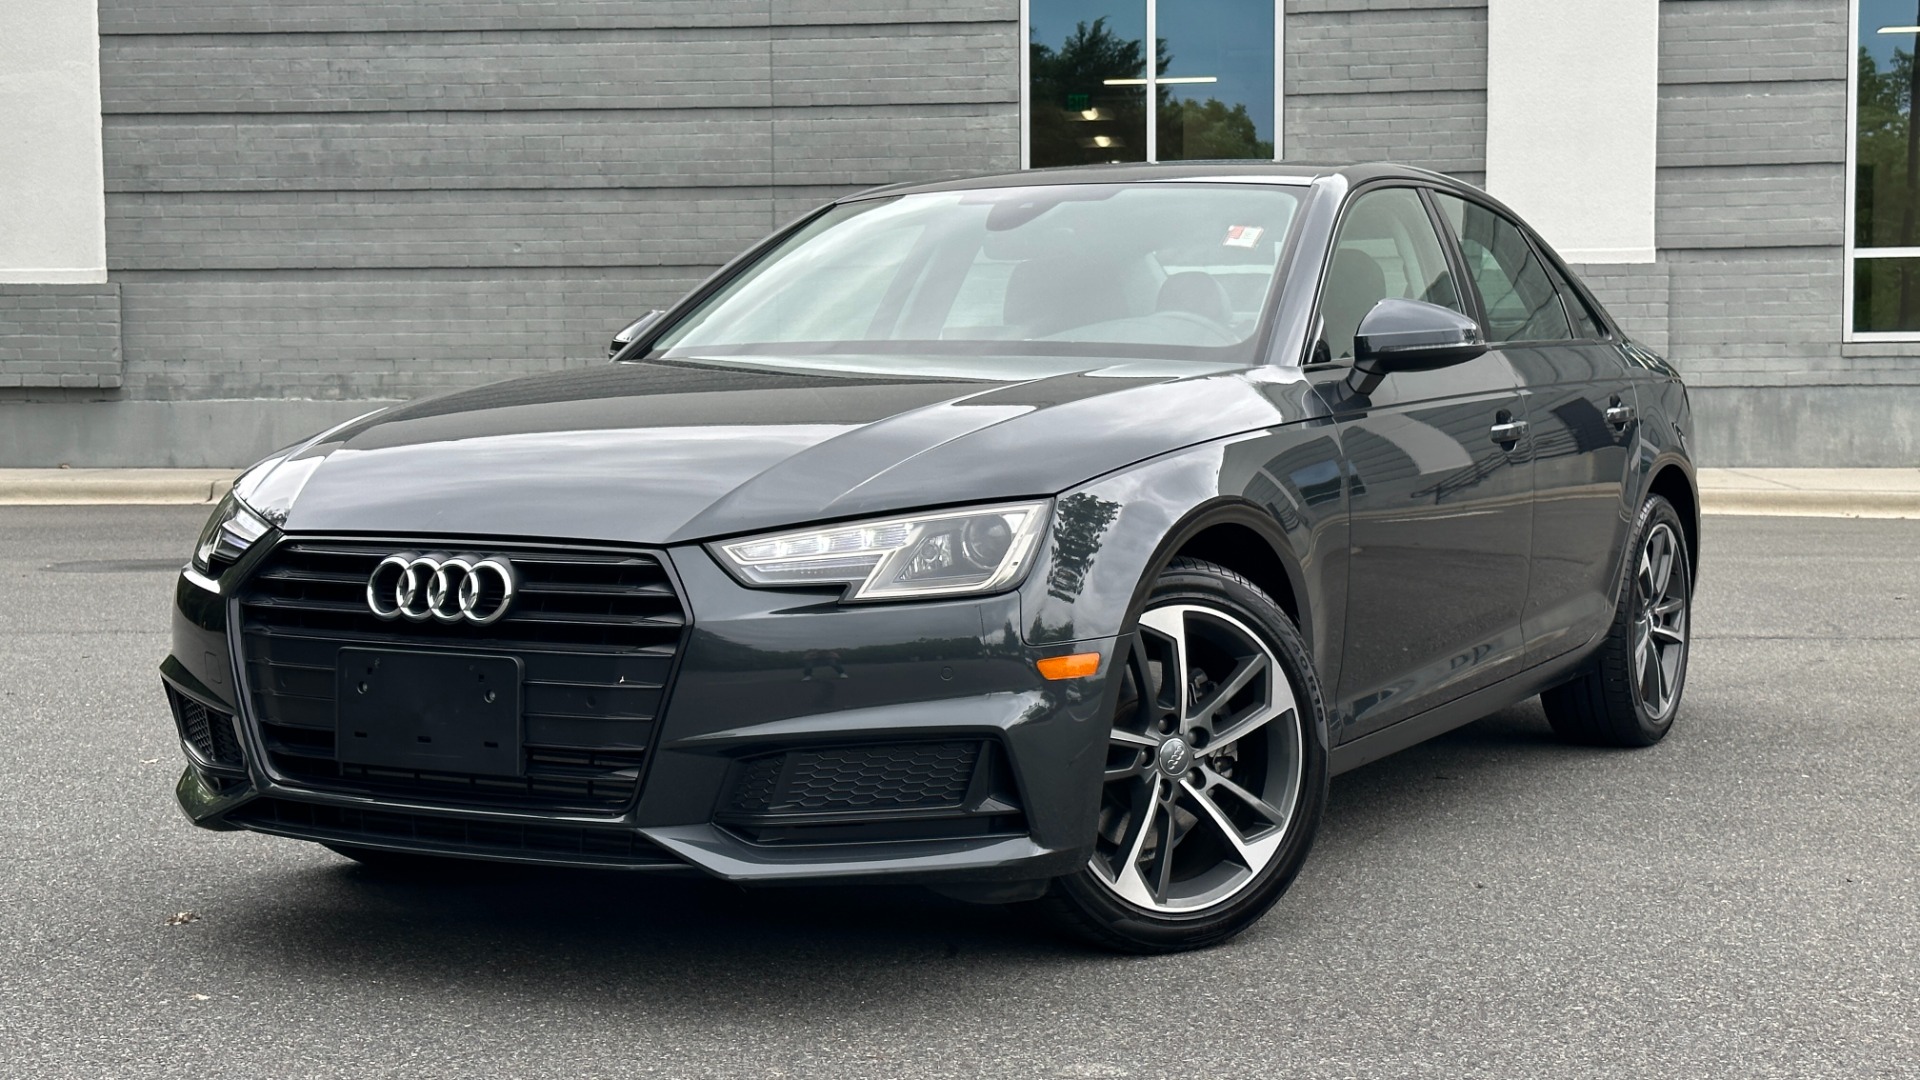 Used 2019 Audi A4 PREMIUM / AUDI BEAM RINGS / AUDI GUARD / LEATHER for sale $28,250 at Formula Imports in Charlotte NC 28227 1